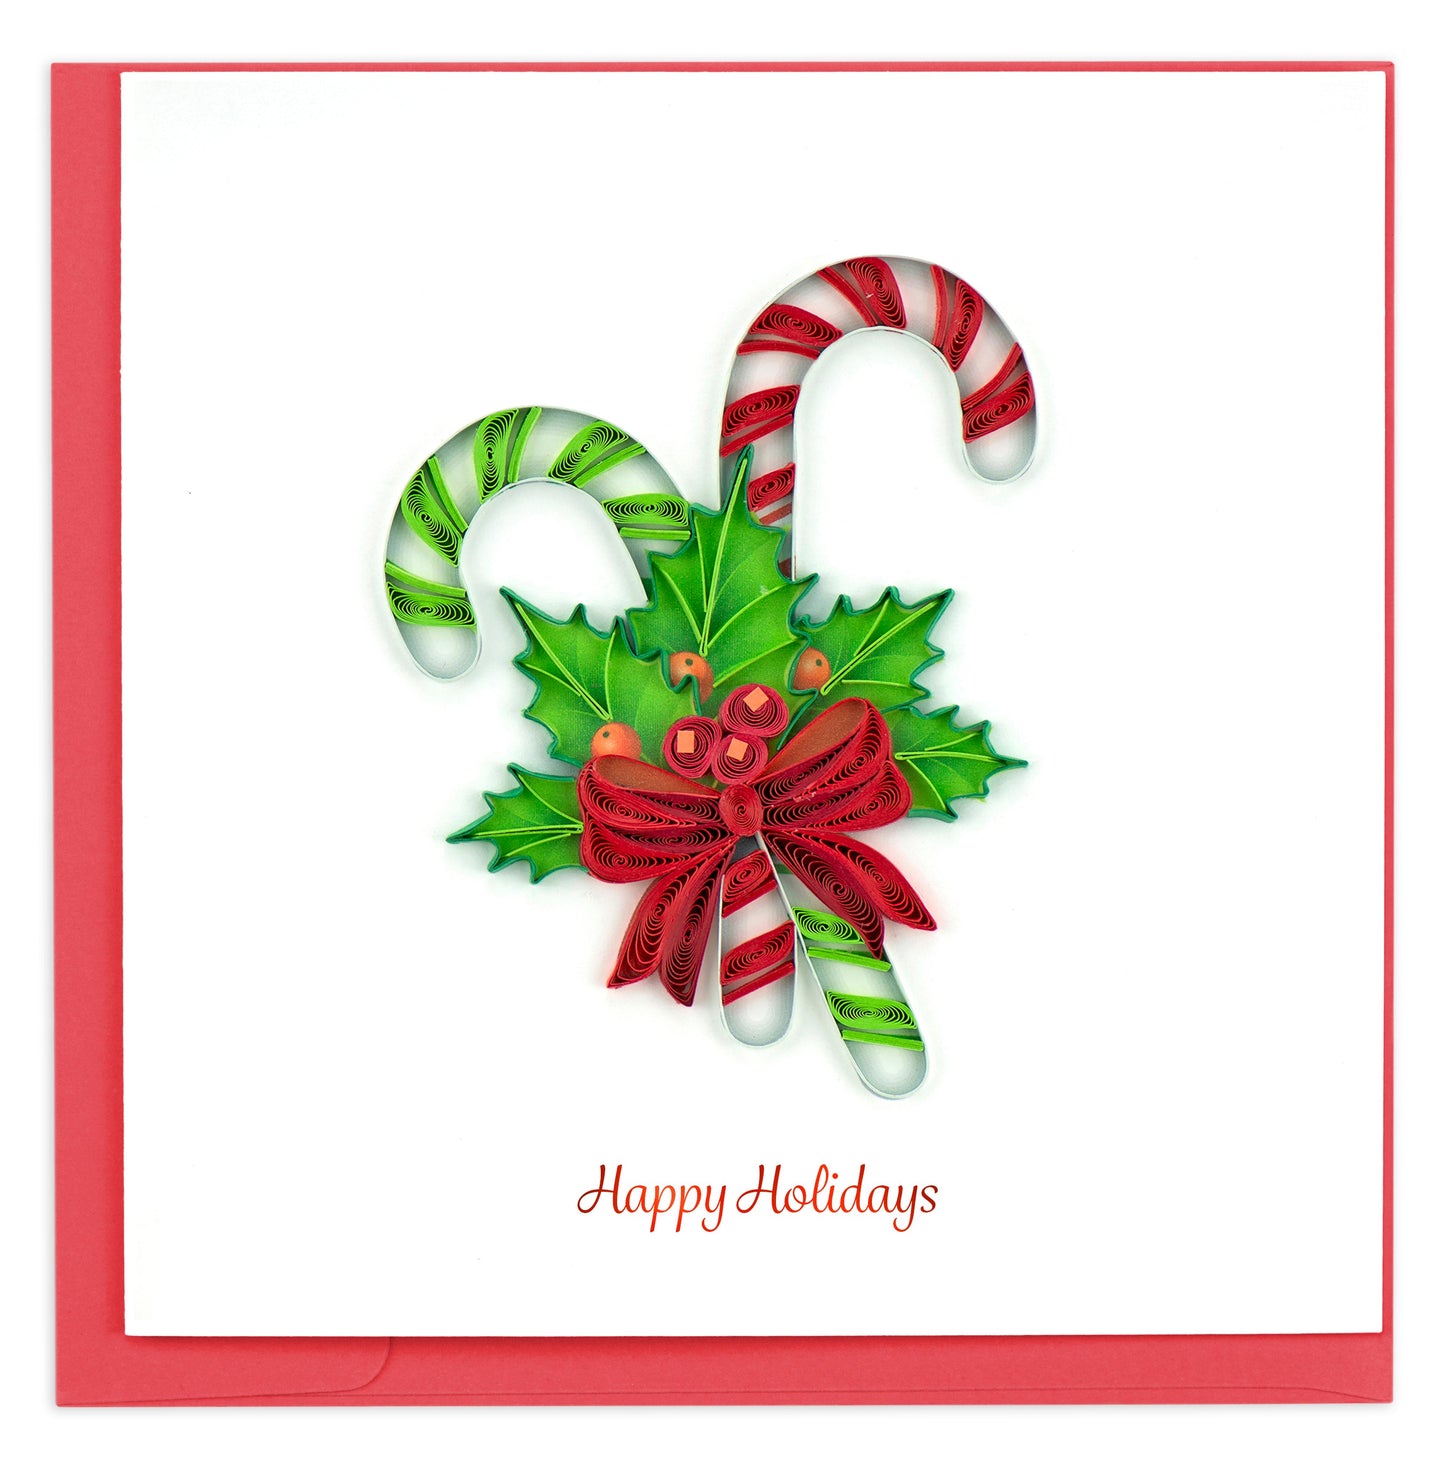 Quilled Candy Canes "Frohe Feiertage" Karte